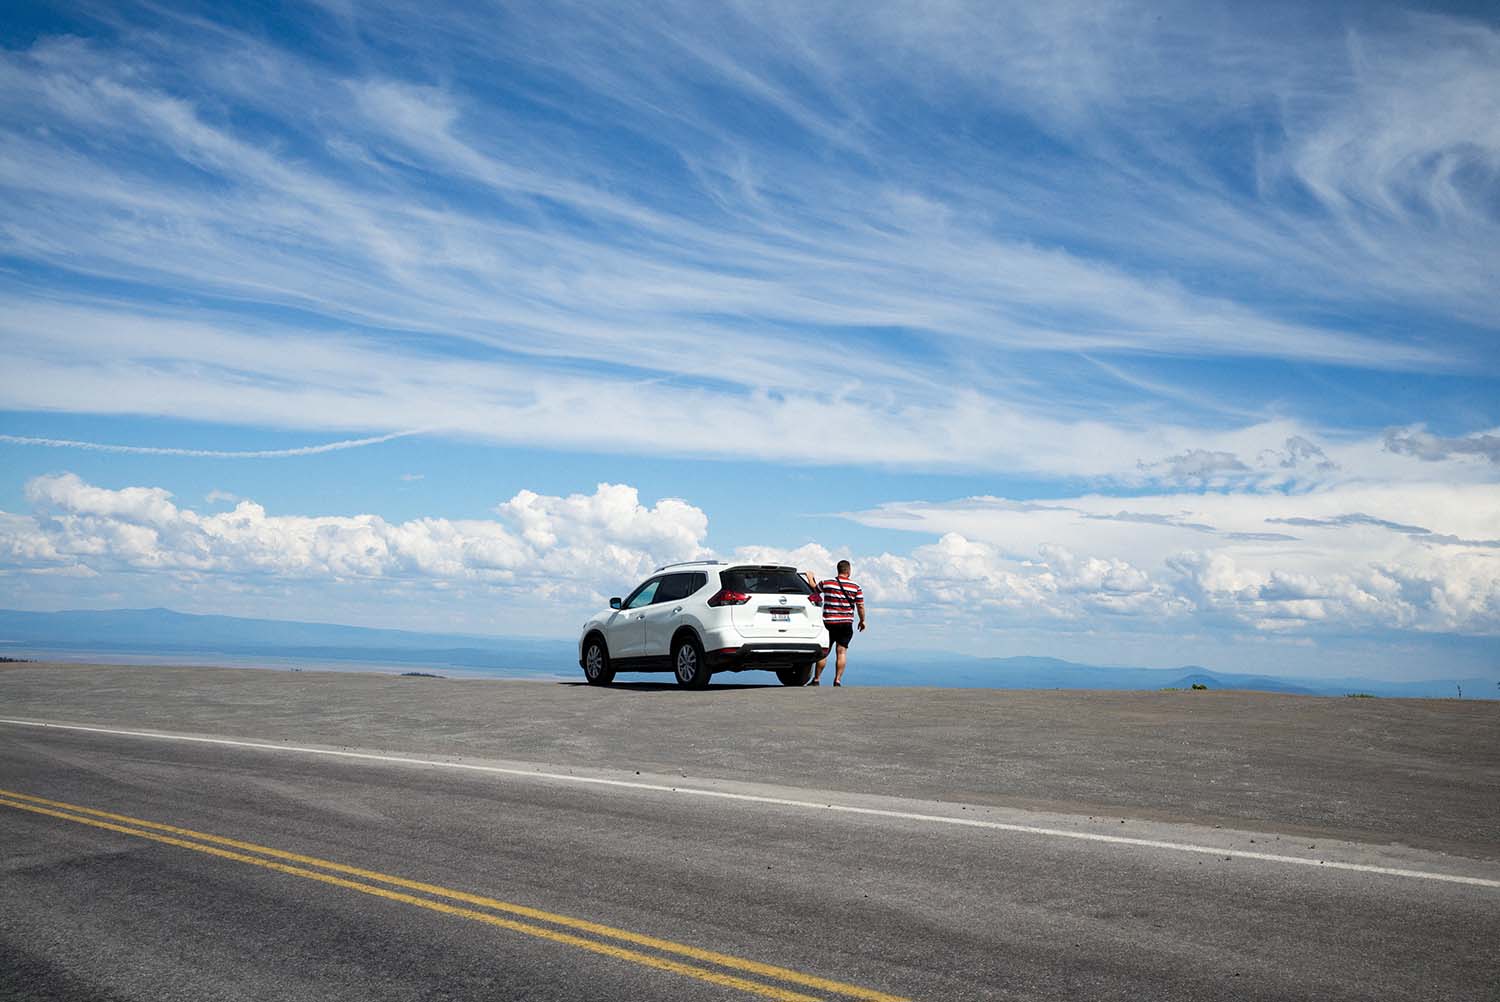 Planning a road trip?  Here's what your car insurance should cover